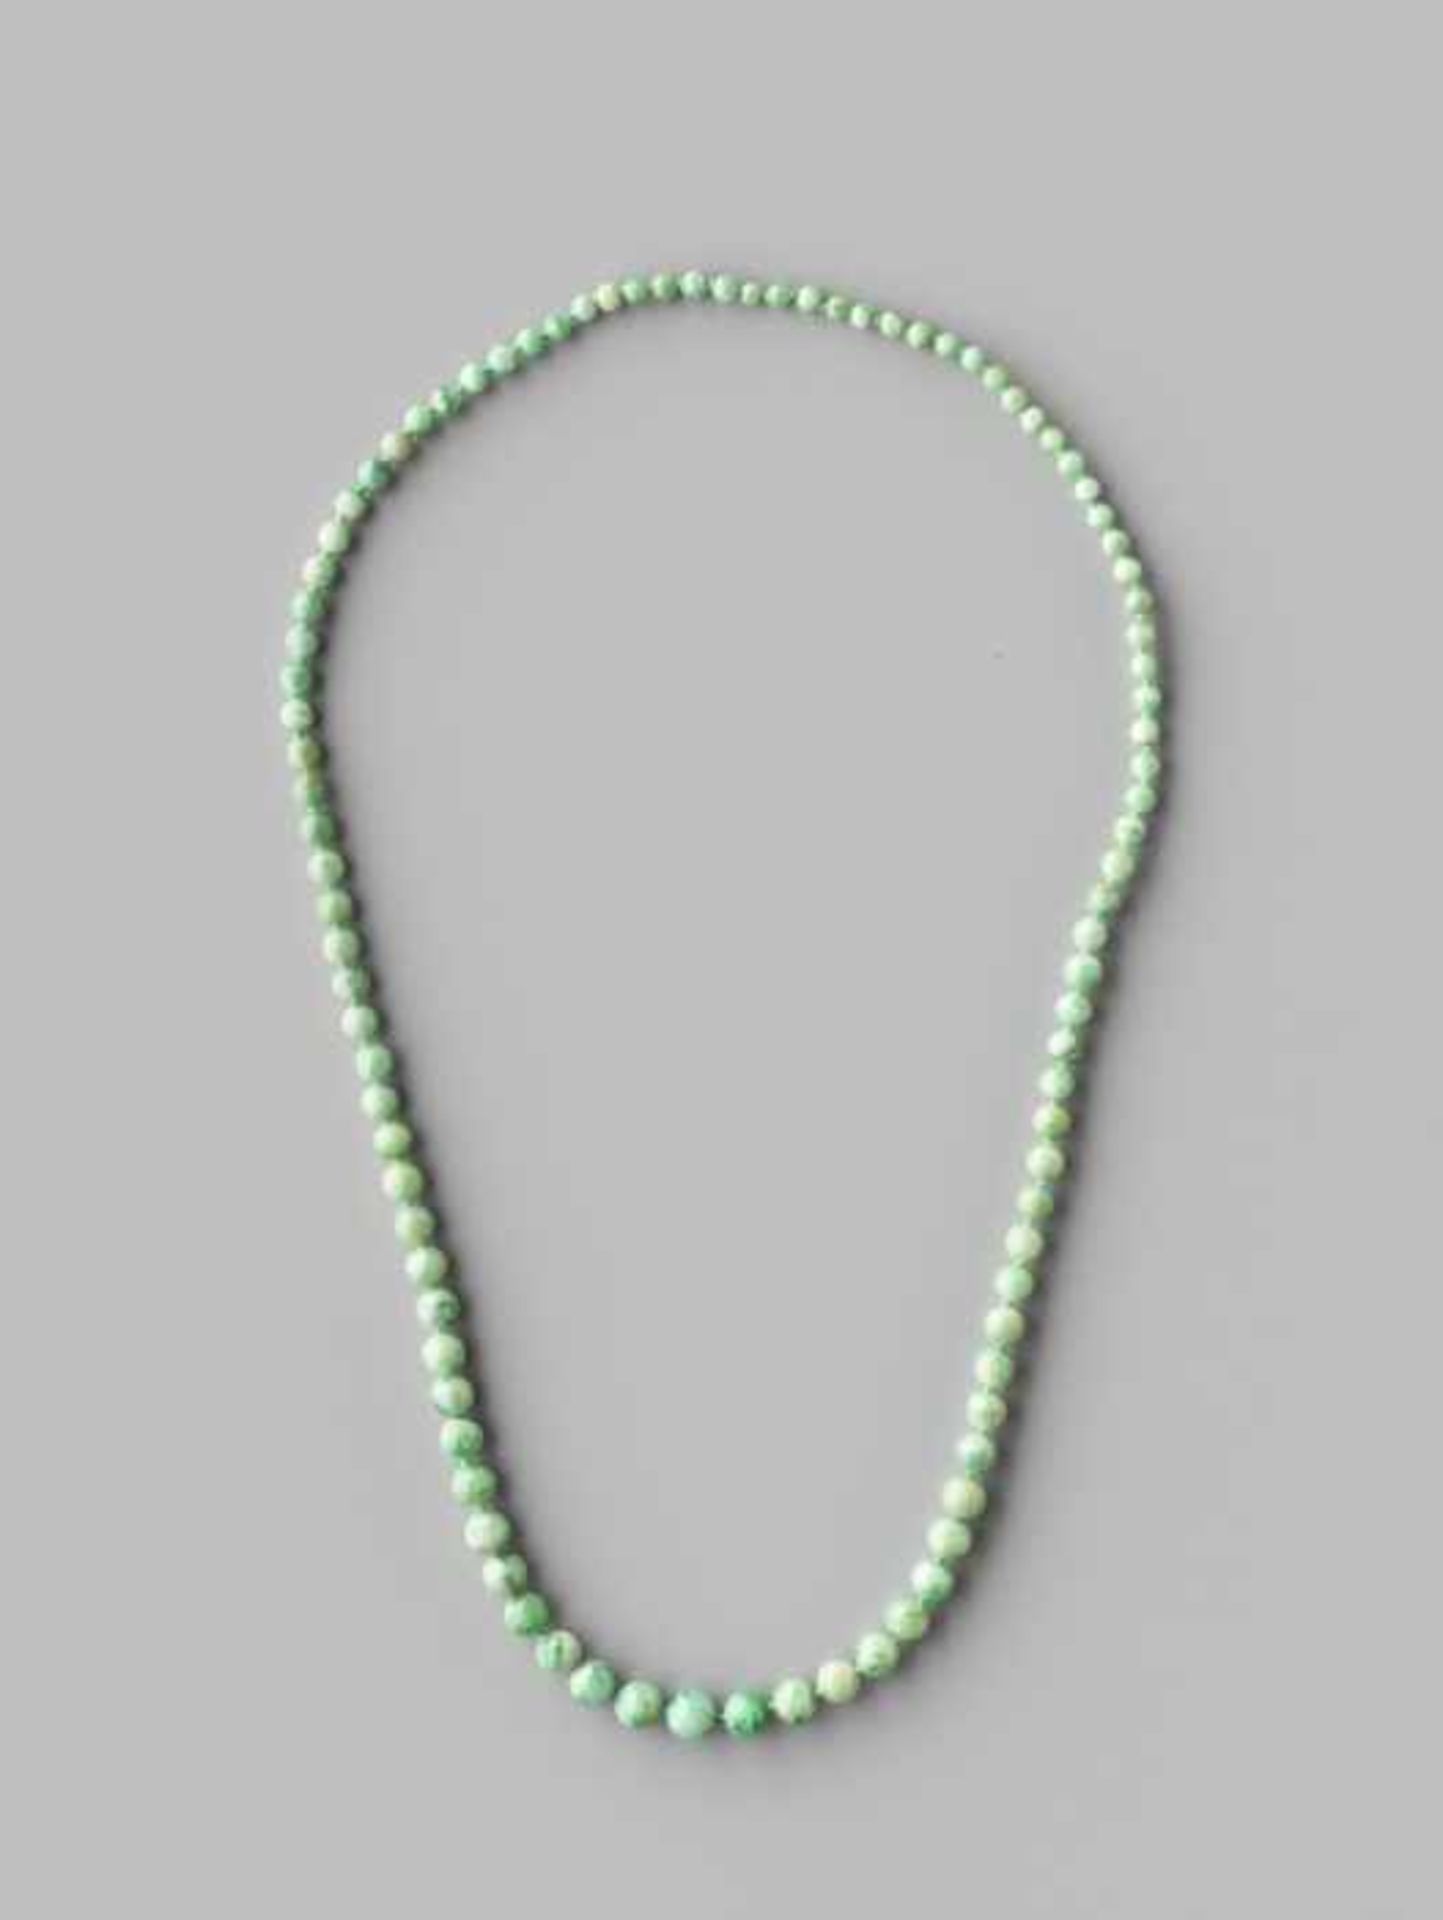 A MOTTLED GREEN JADEITE BEAD NECKLACE, 97 BEADS, LATE QING DYNASTY The natural jadeite beads of - Image 3 of 4